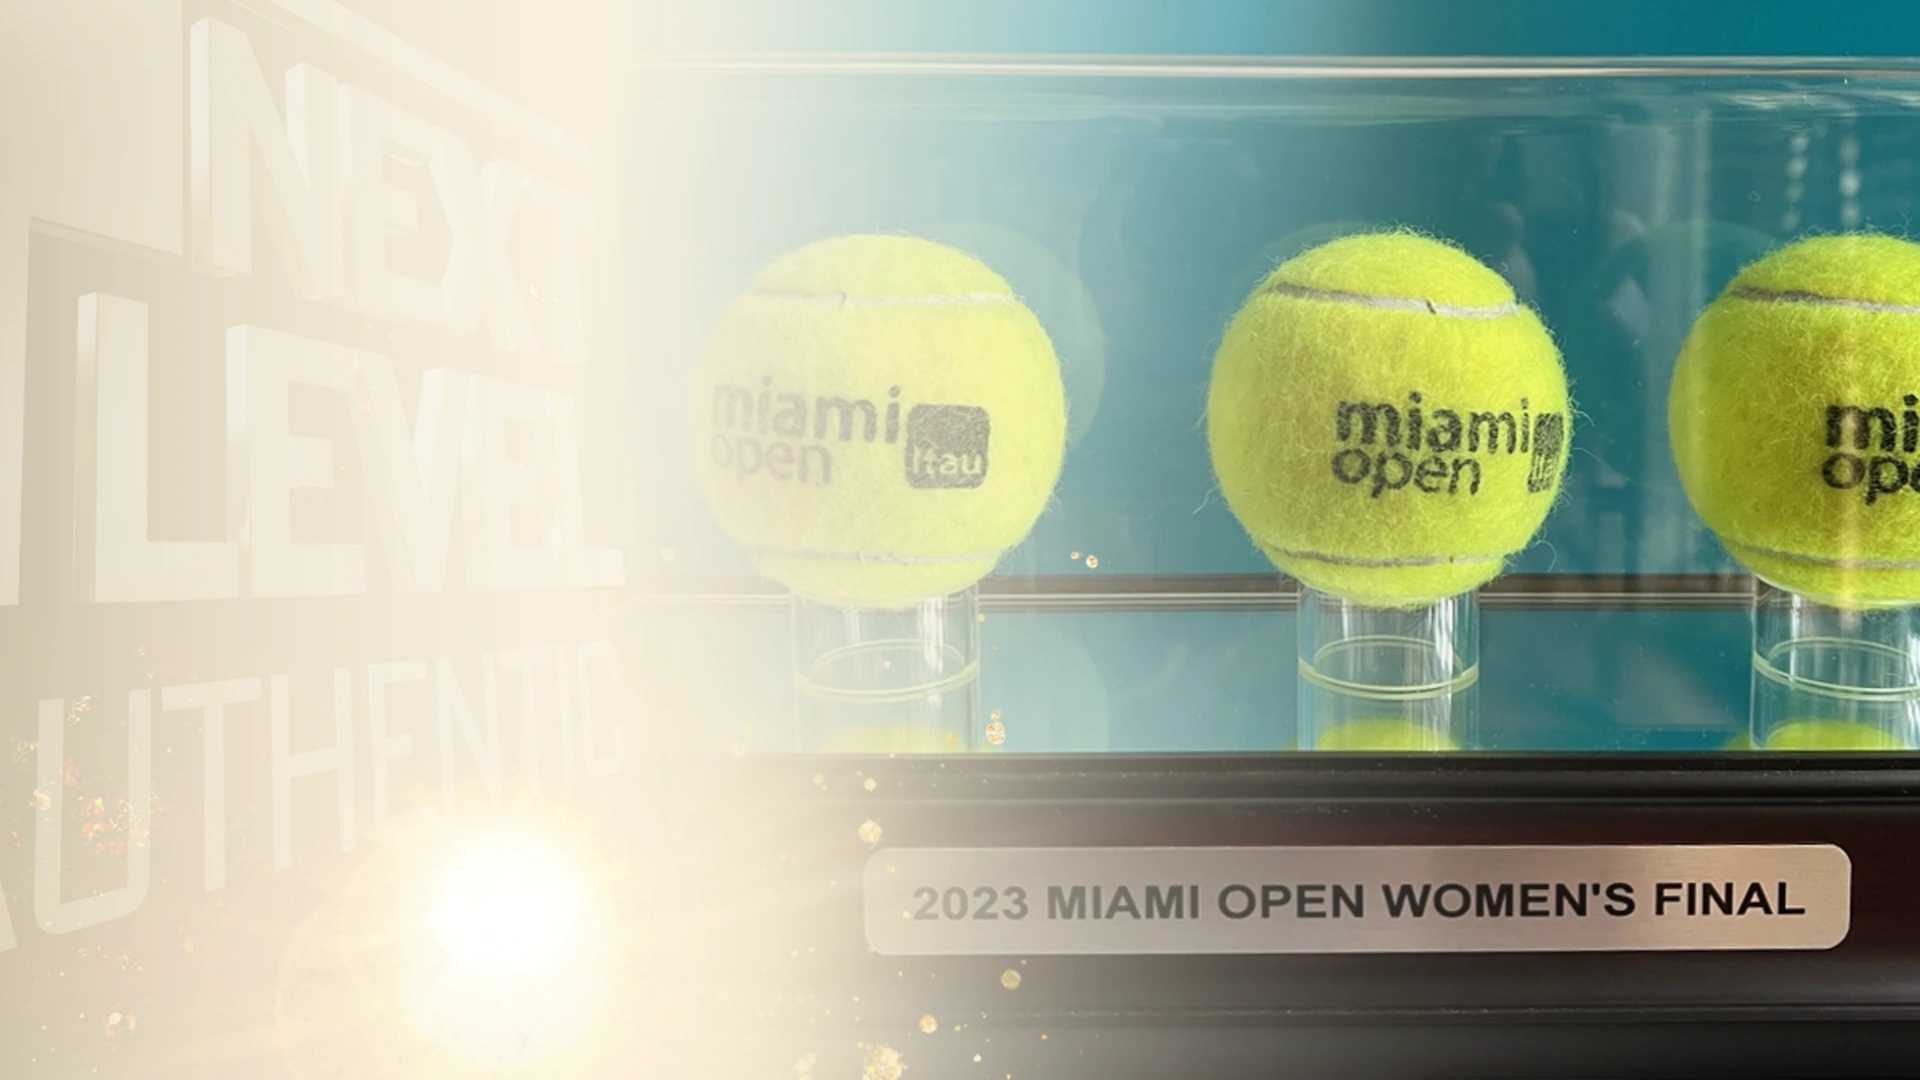 Set of three tennis balls used in the WTA 1000 women’s final match at the 2023 Miami Open.  The match featured Elena Rybakina vs. Petra Kvitová, and was won by Kvitová in two sets.